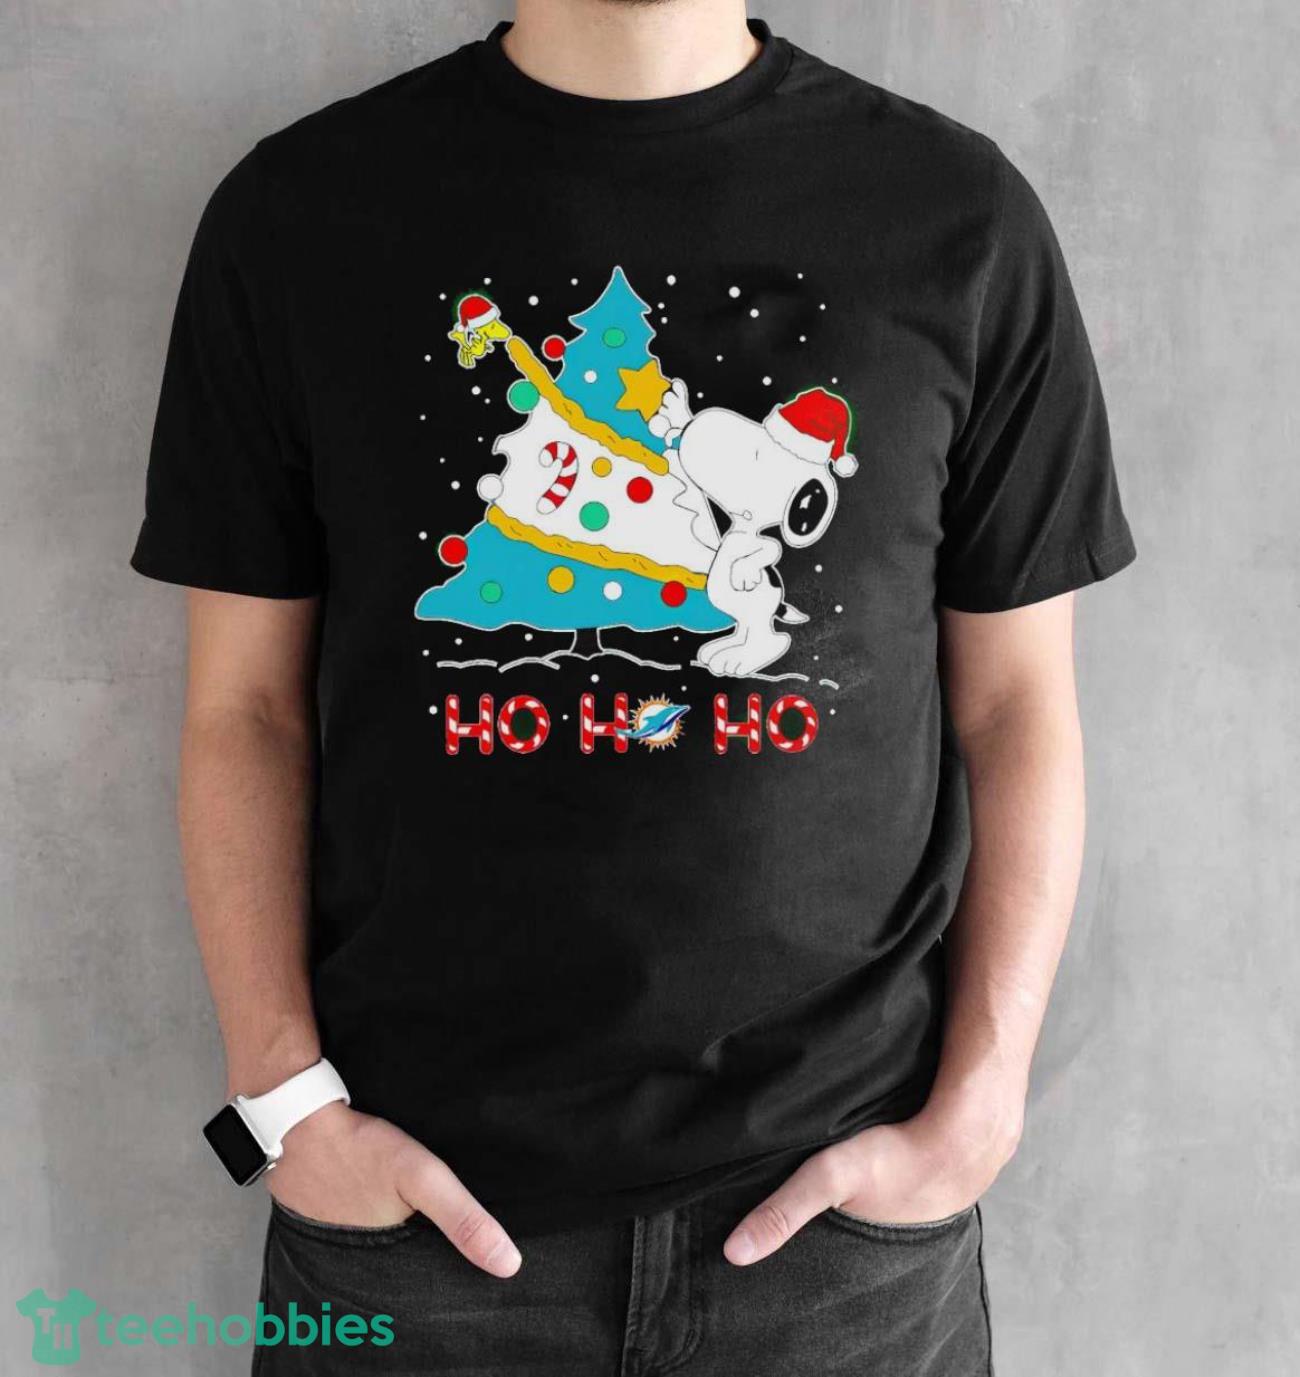 Miami Dolphins Shop - Snoopy and Woodstock Miami Dolphins Christmas T shirt